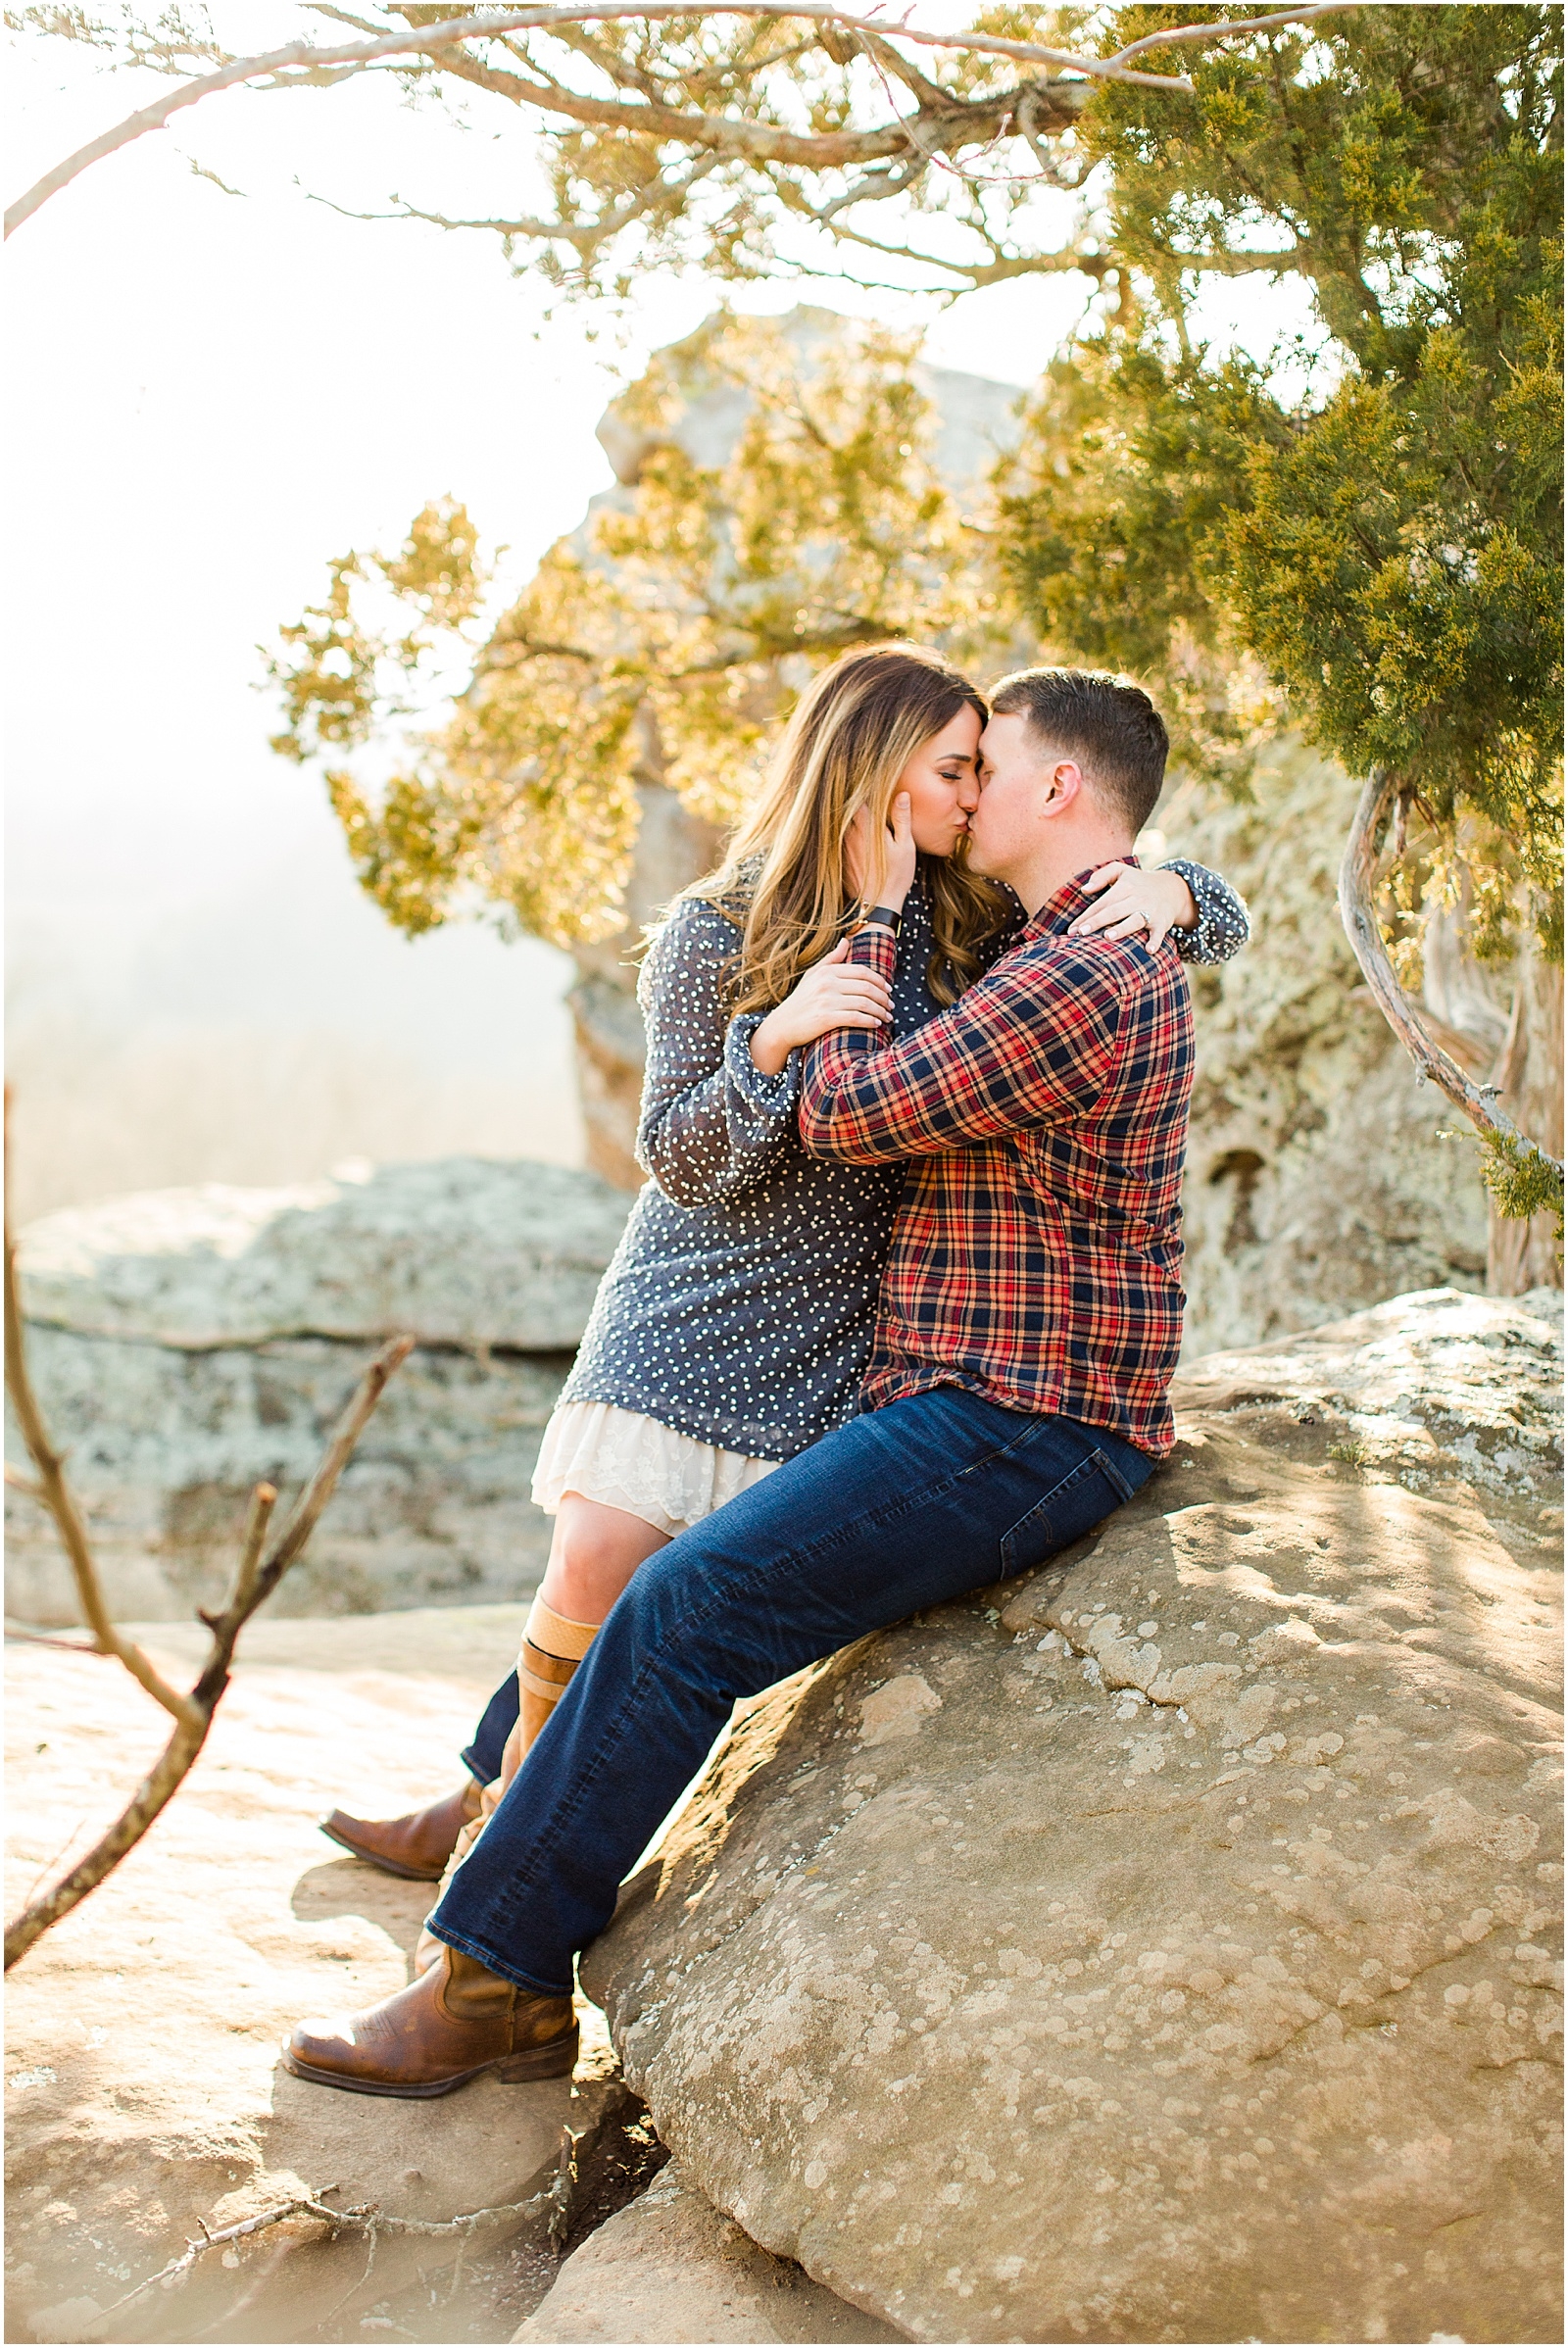 A Sunny Garden of the Gods Engagement Session | Shiloh and Lee | Bret and Brandie Photography019.jpg